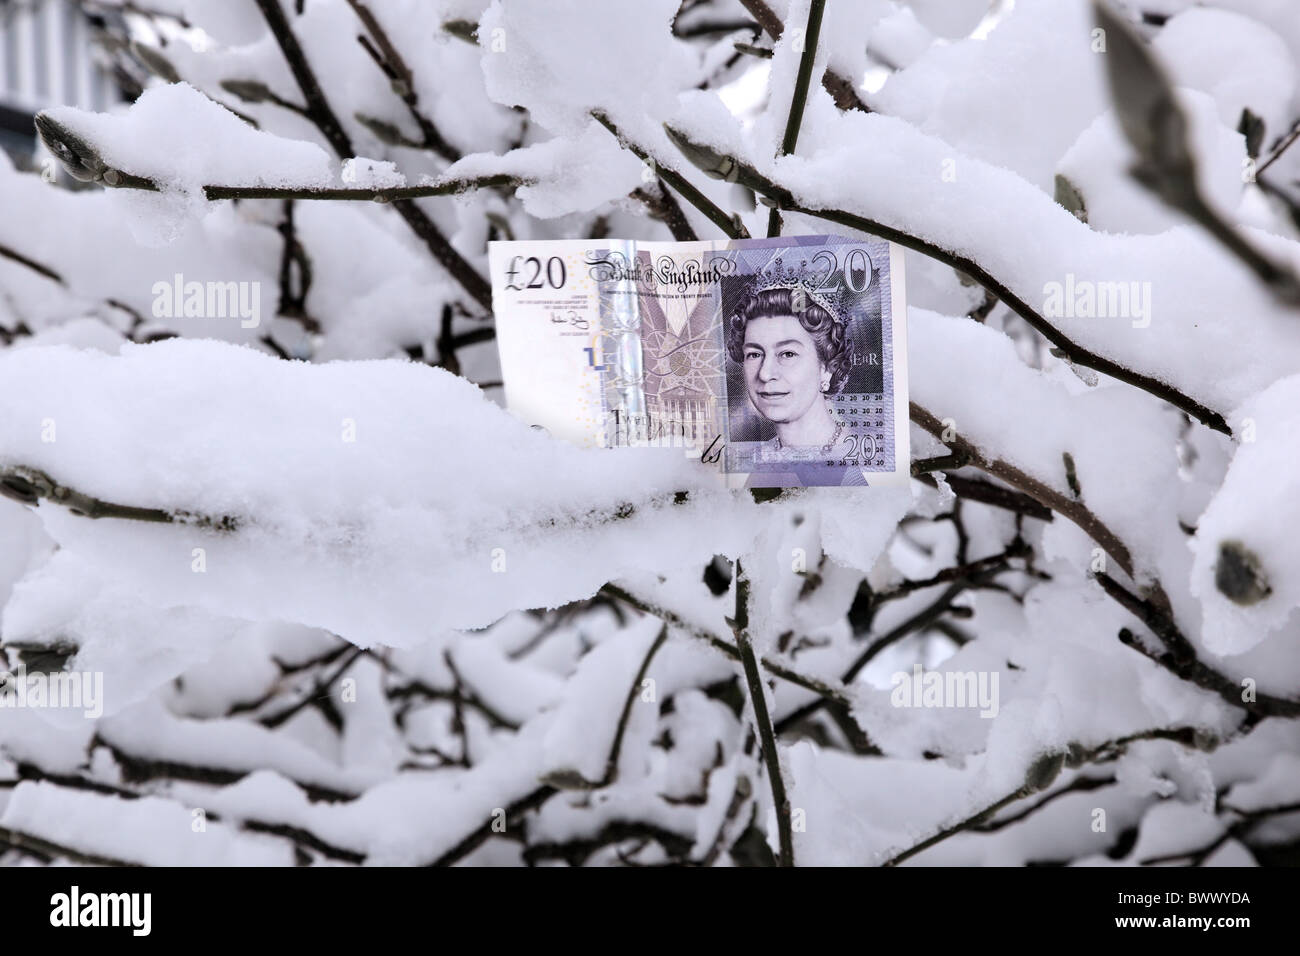 £20 note on a tree covered in snow Stock Photo